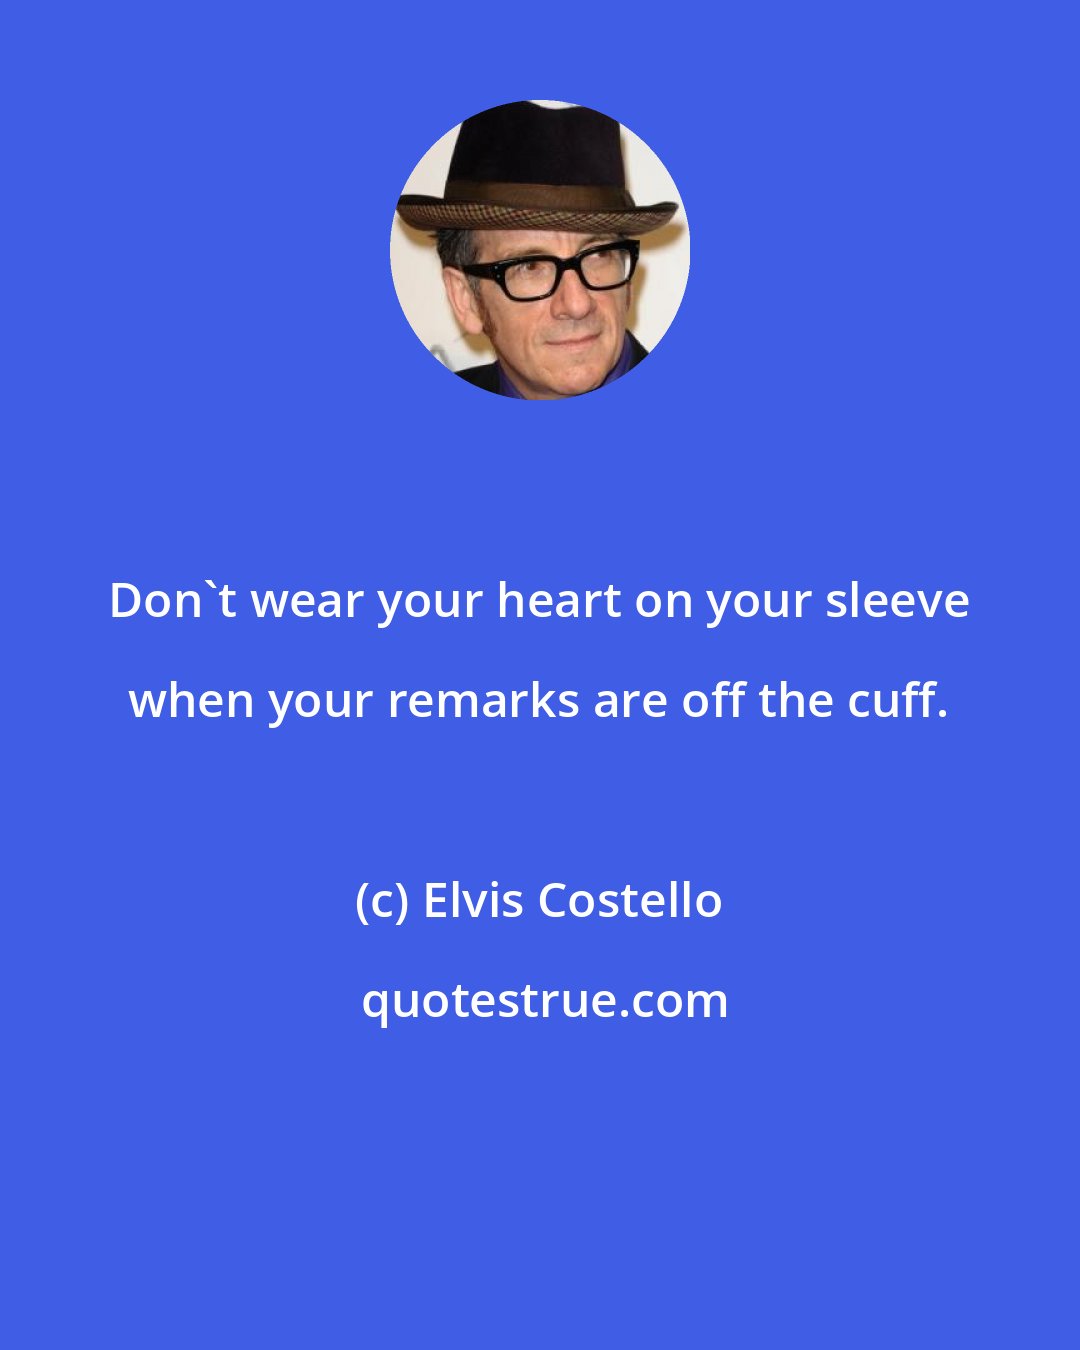 Elvis Costello: Don't wear your heart on your sleeve when your remarks are off the cuff.